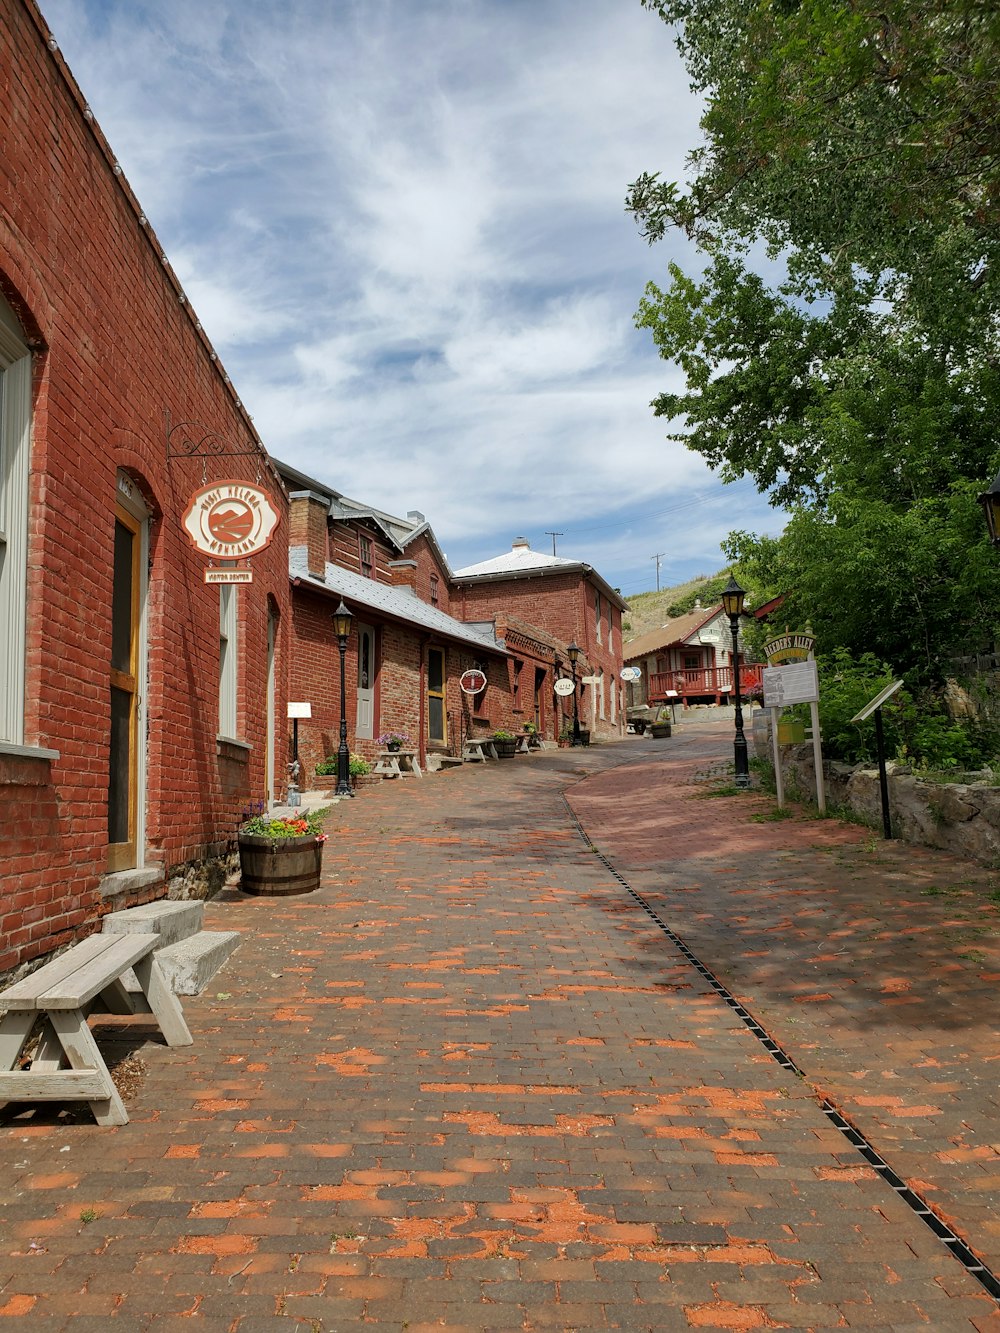 a brick street lined with benches next to a building